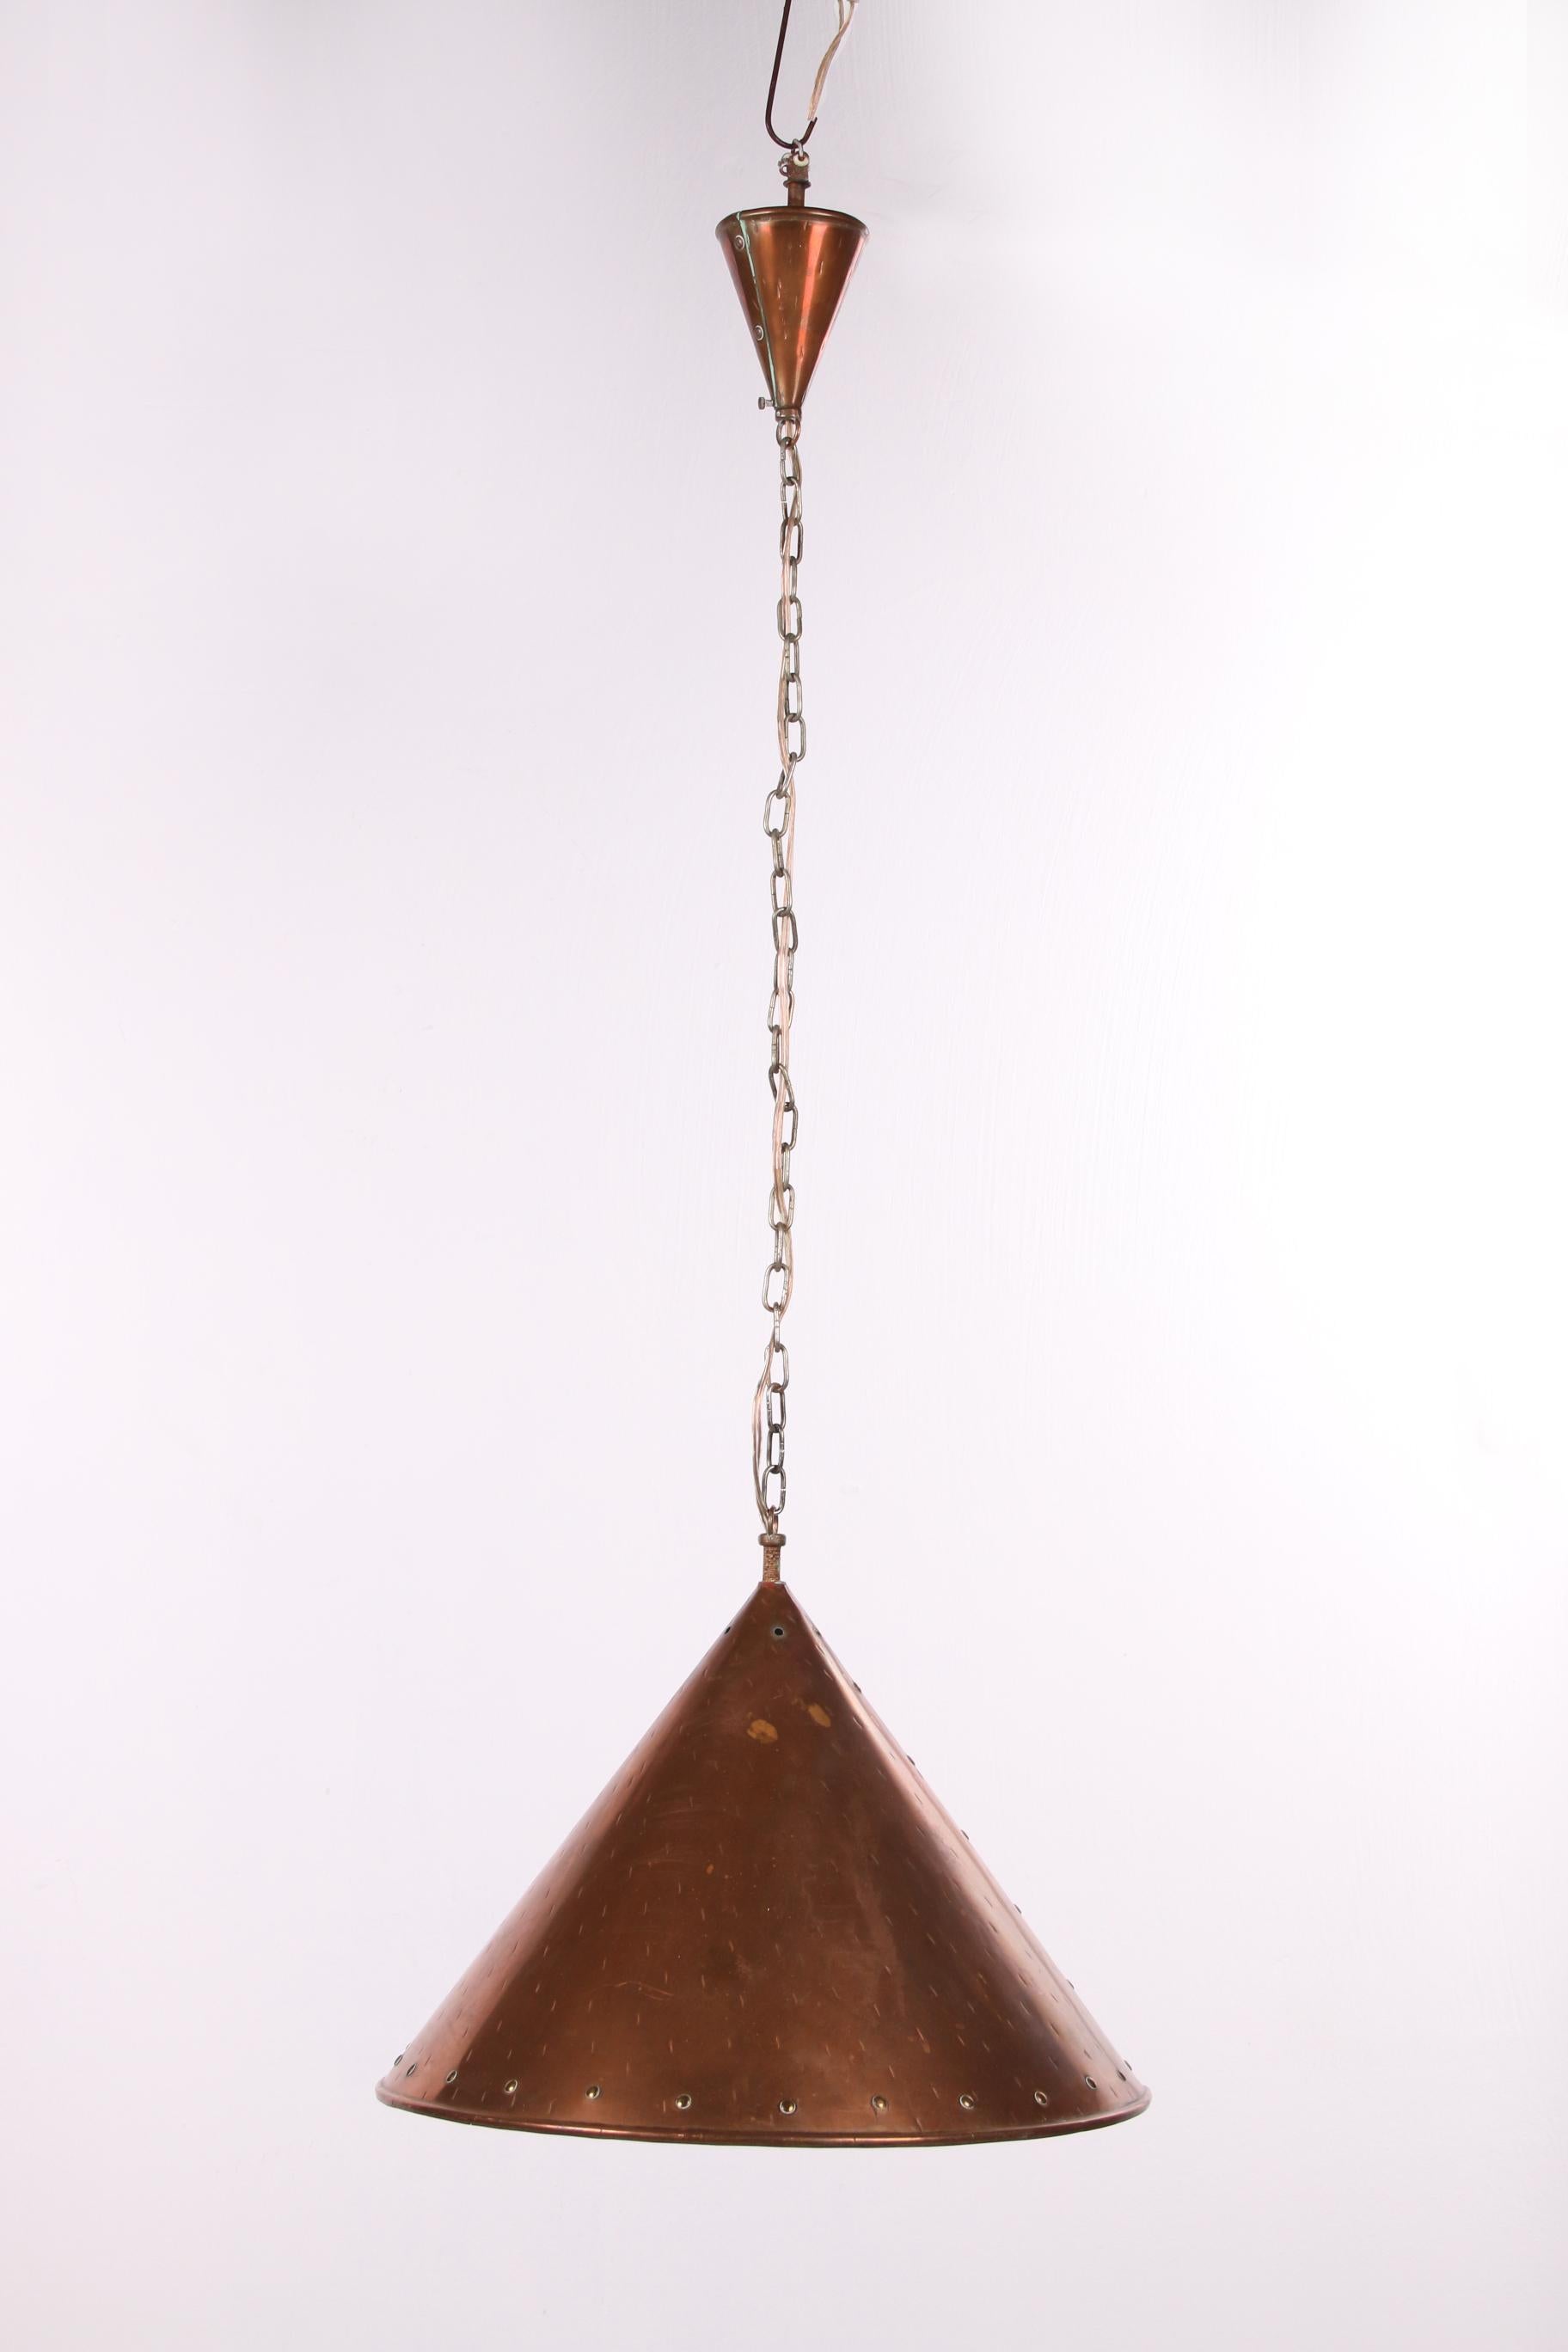 1   Danish Hand-hammered Copper Pendant Lamp by E.S Horn Aalestrup, 50s For Sale 7